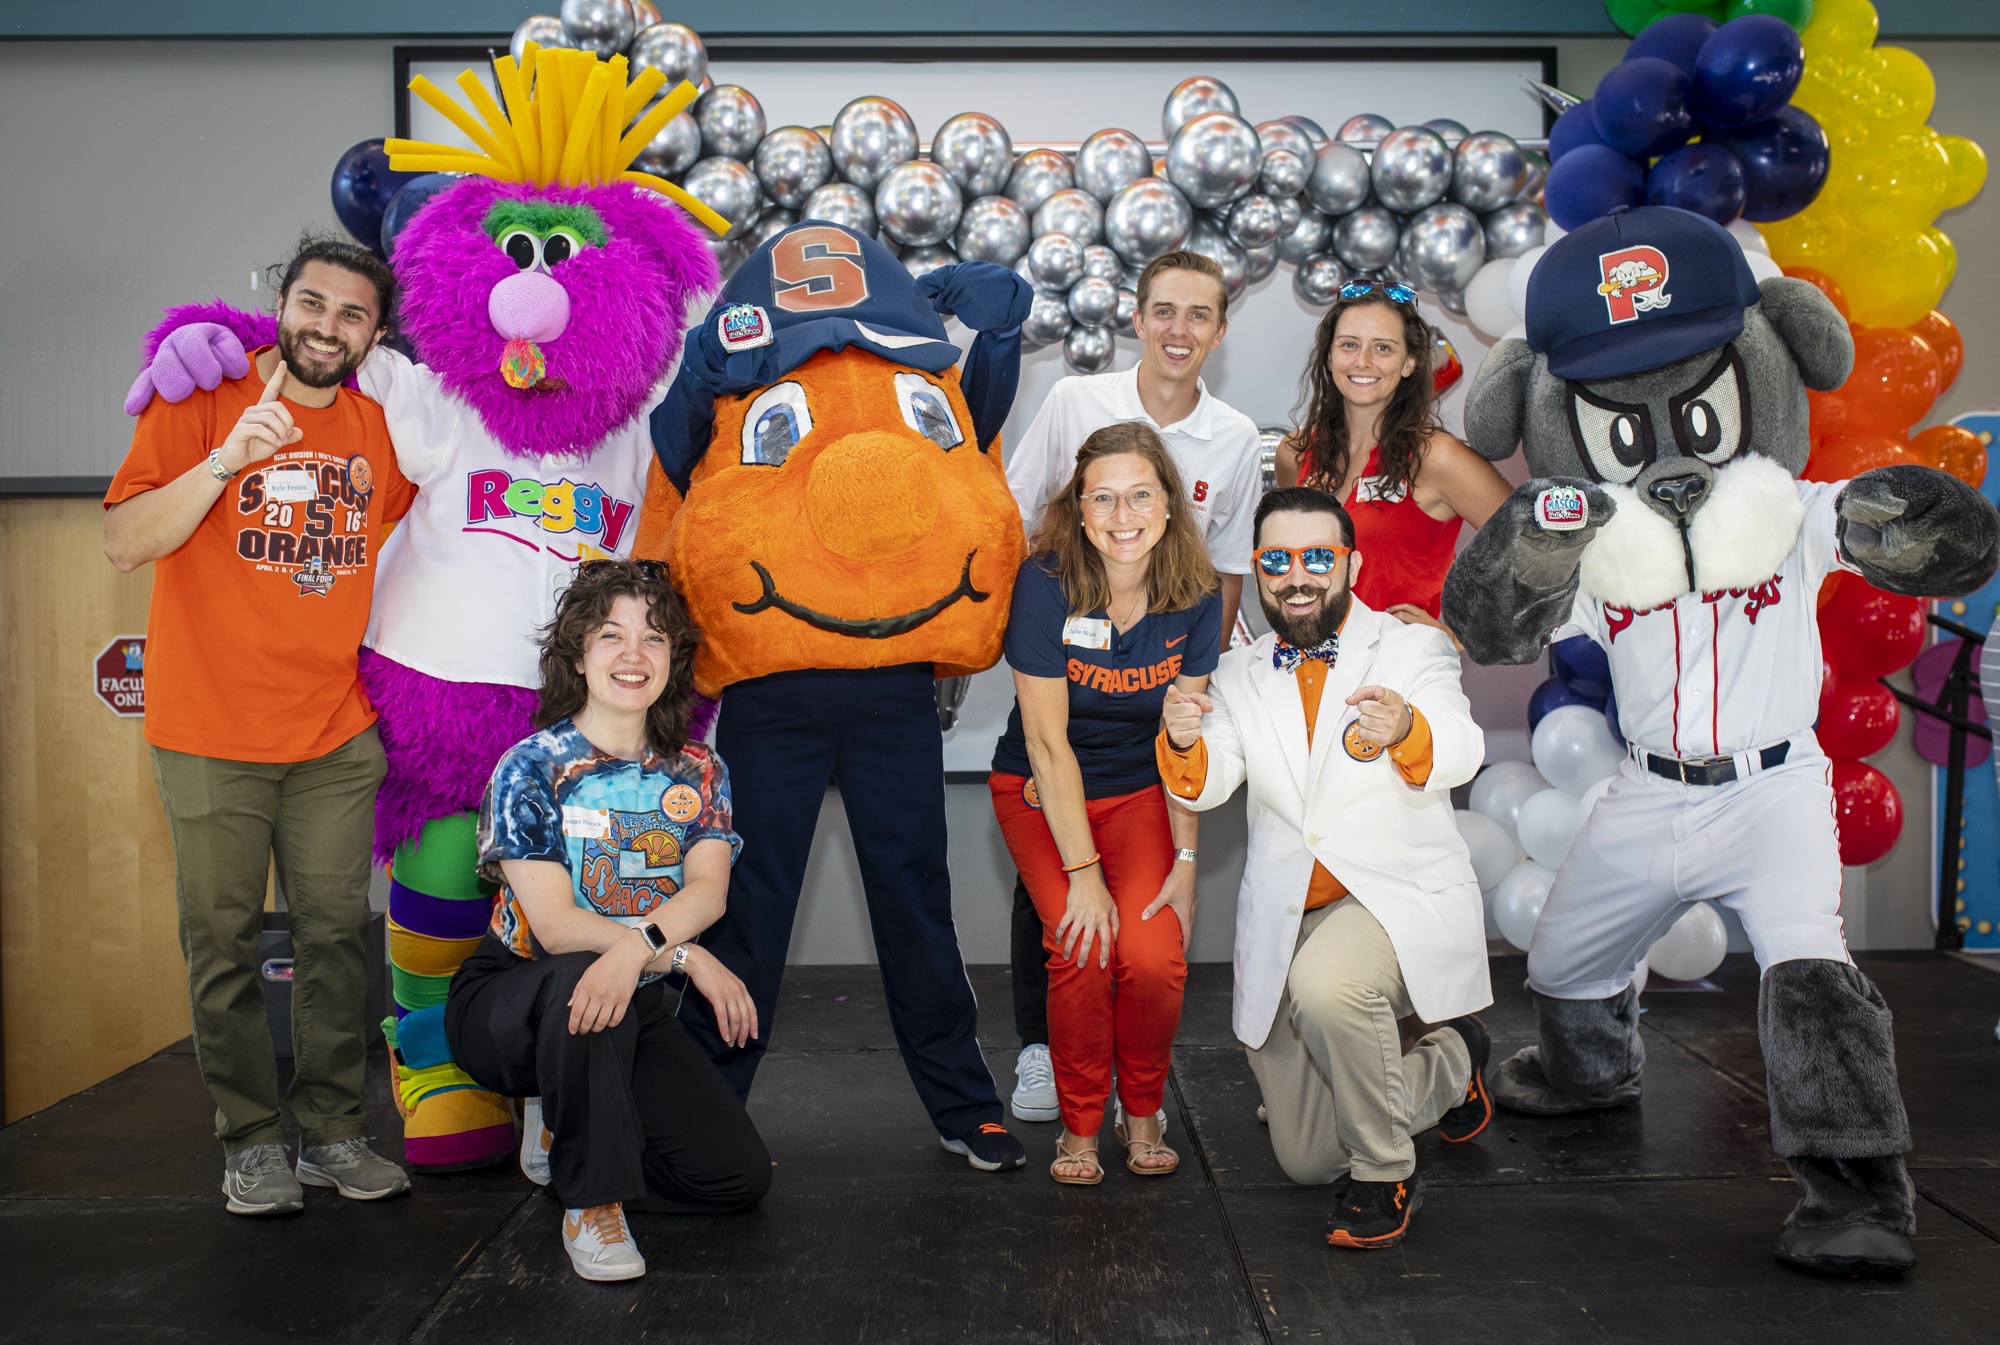 Otto the Orange and Slugger the Seadog with a group of people standing together